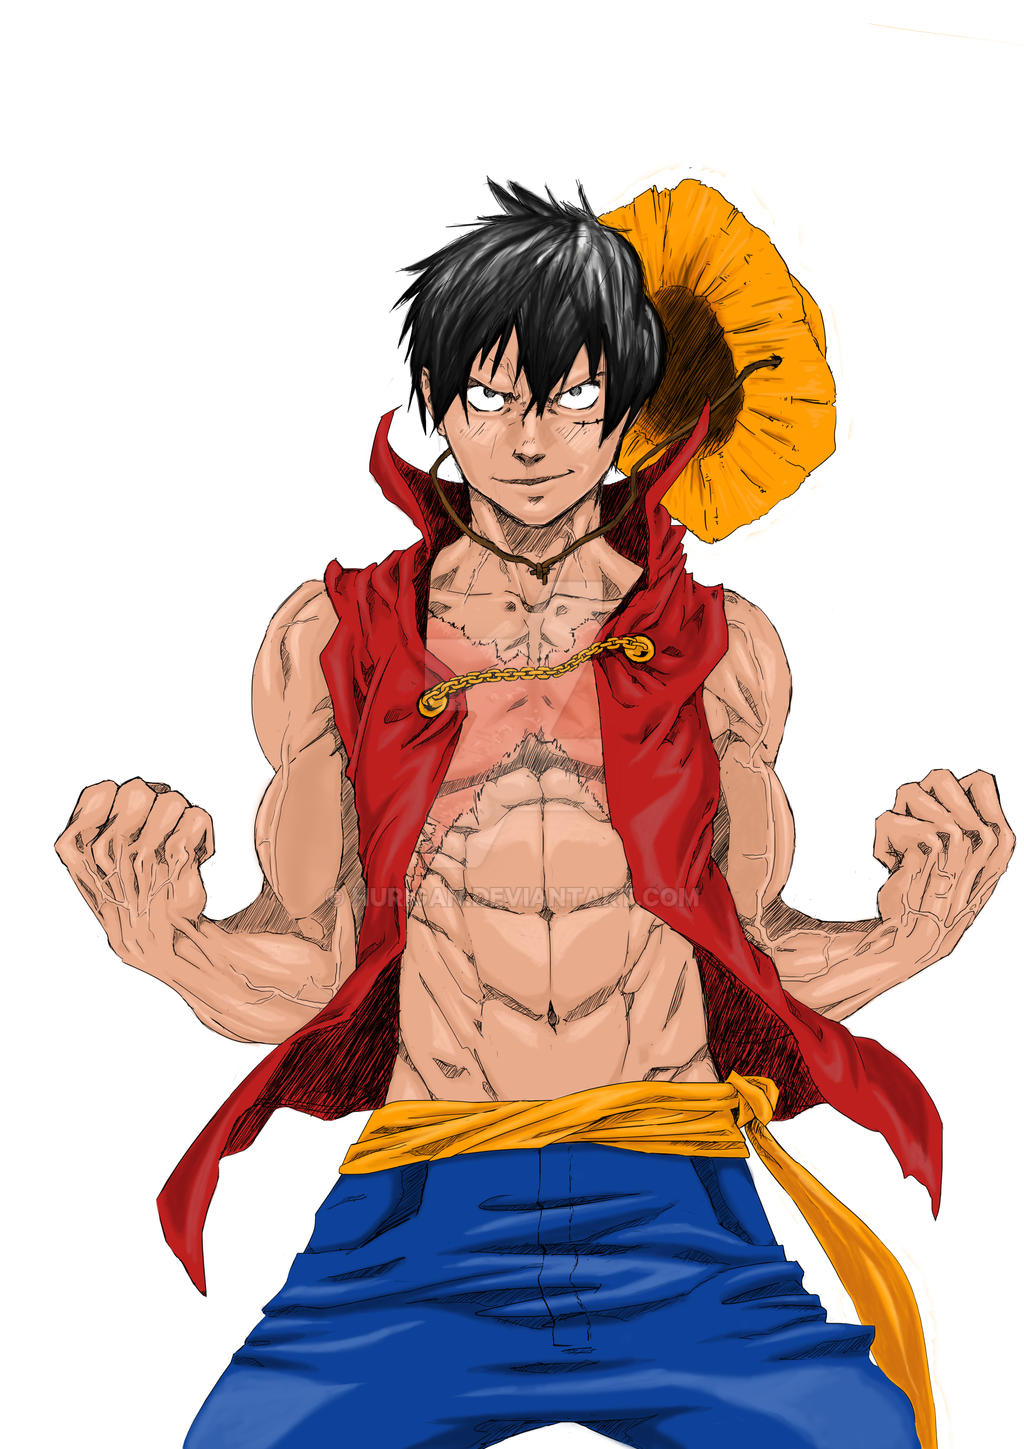 Luffy King Of Pirates by hurigan on DeviantArt